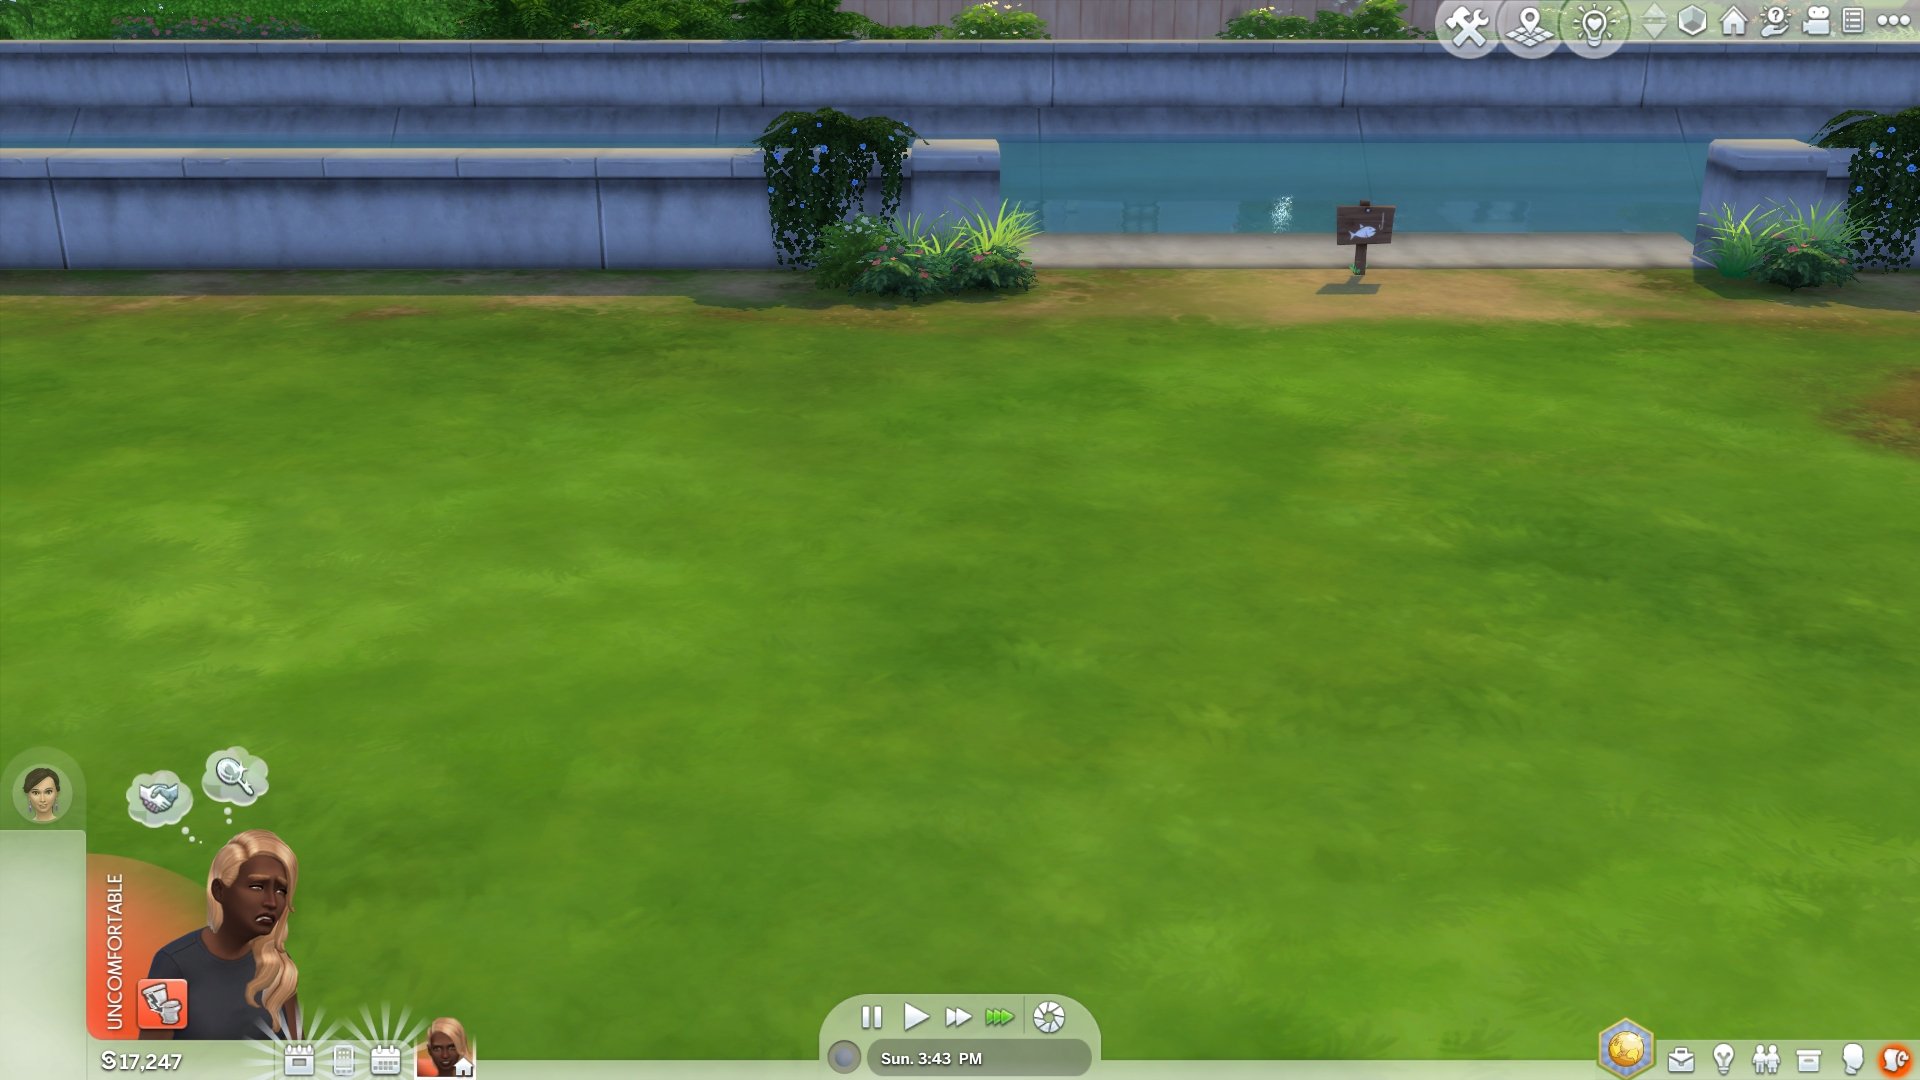 The Sims 4 image 7.